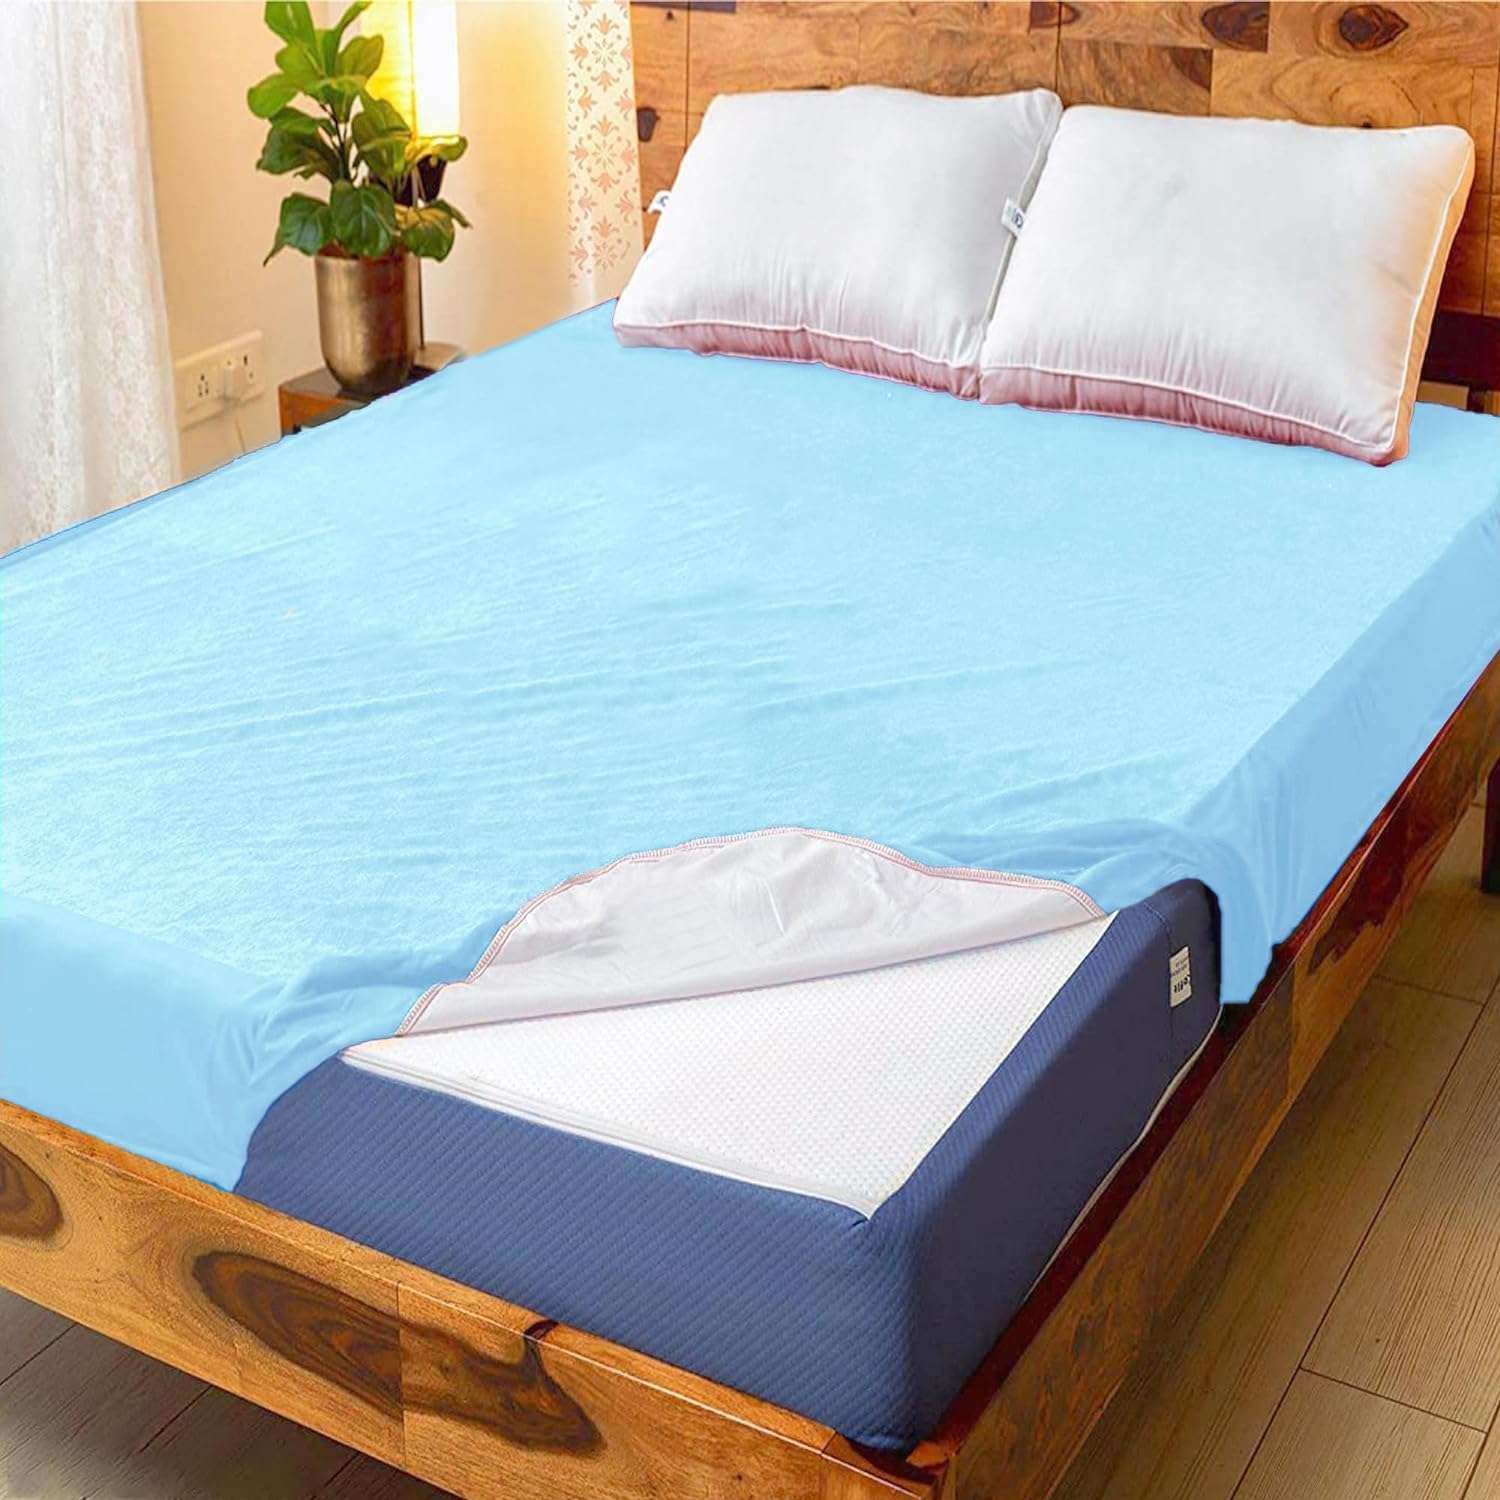 Water resistant double bed protector